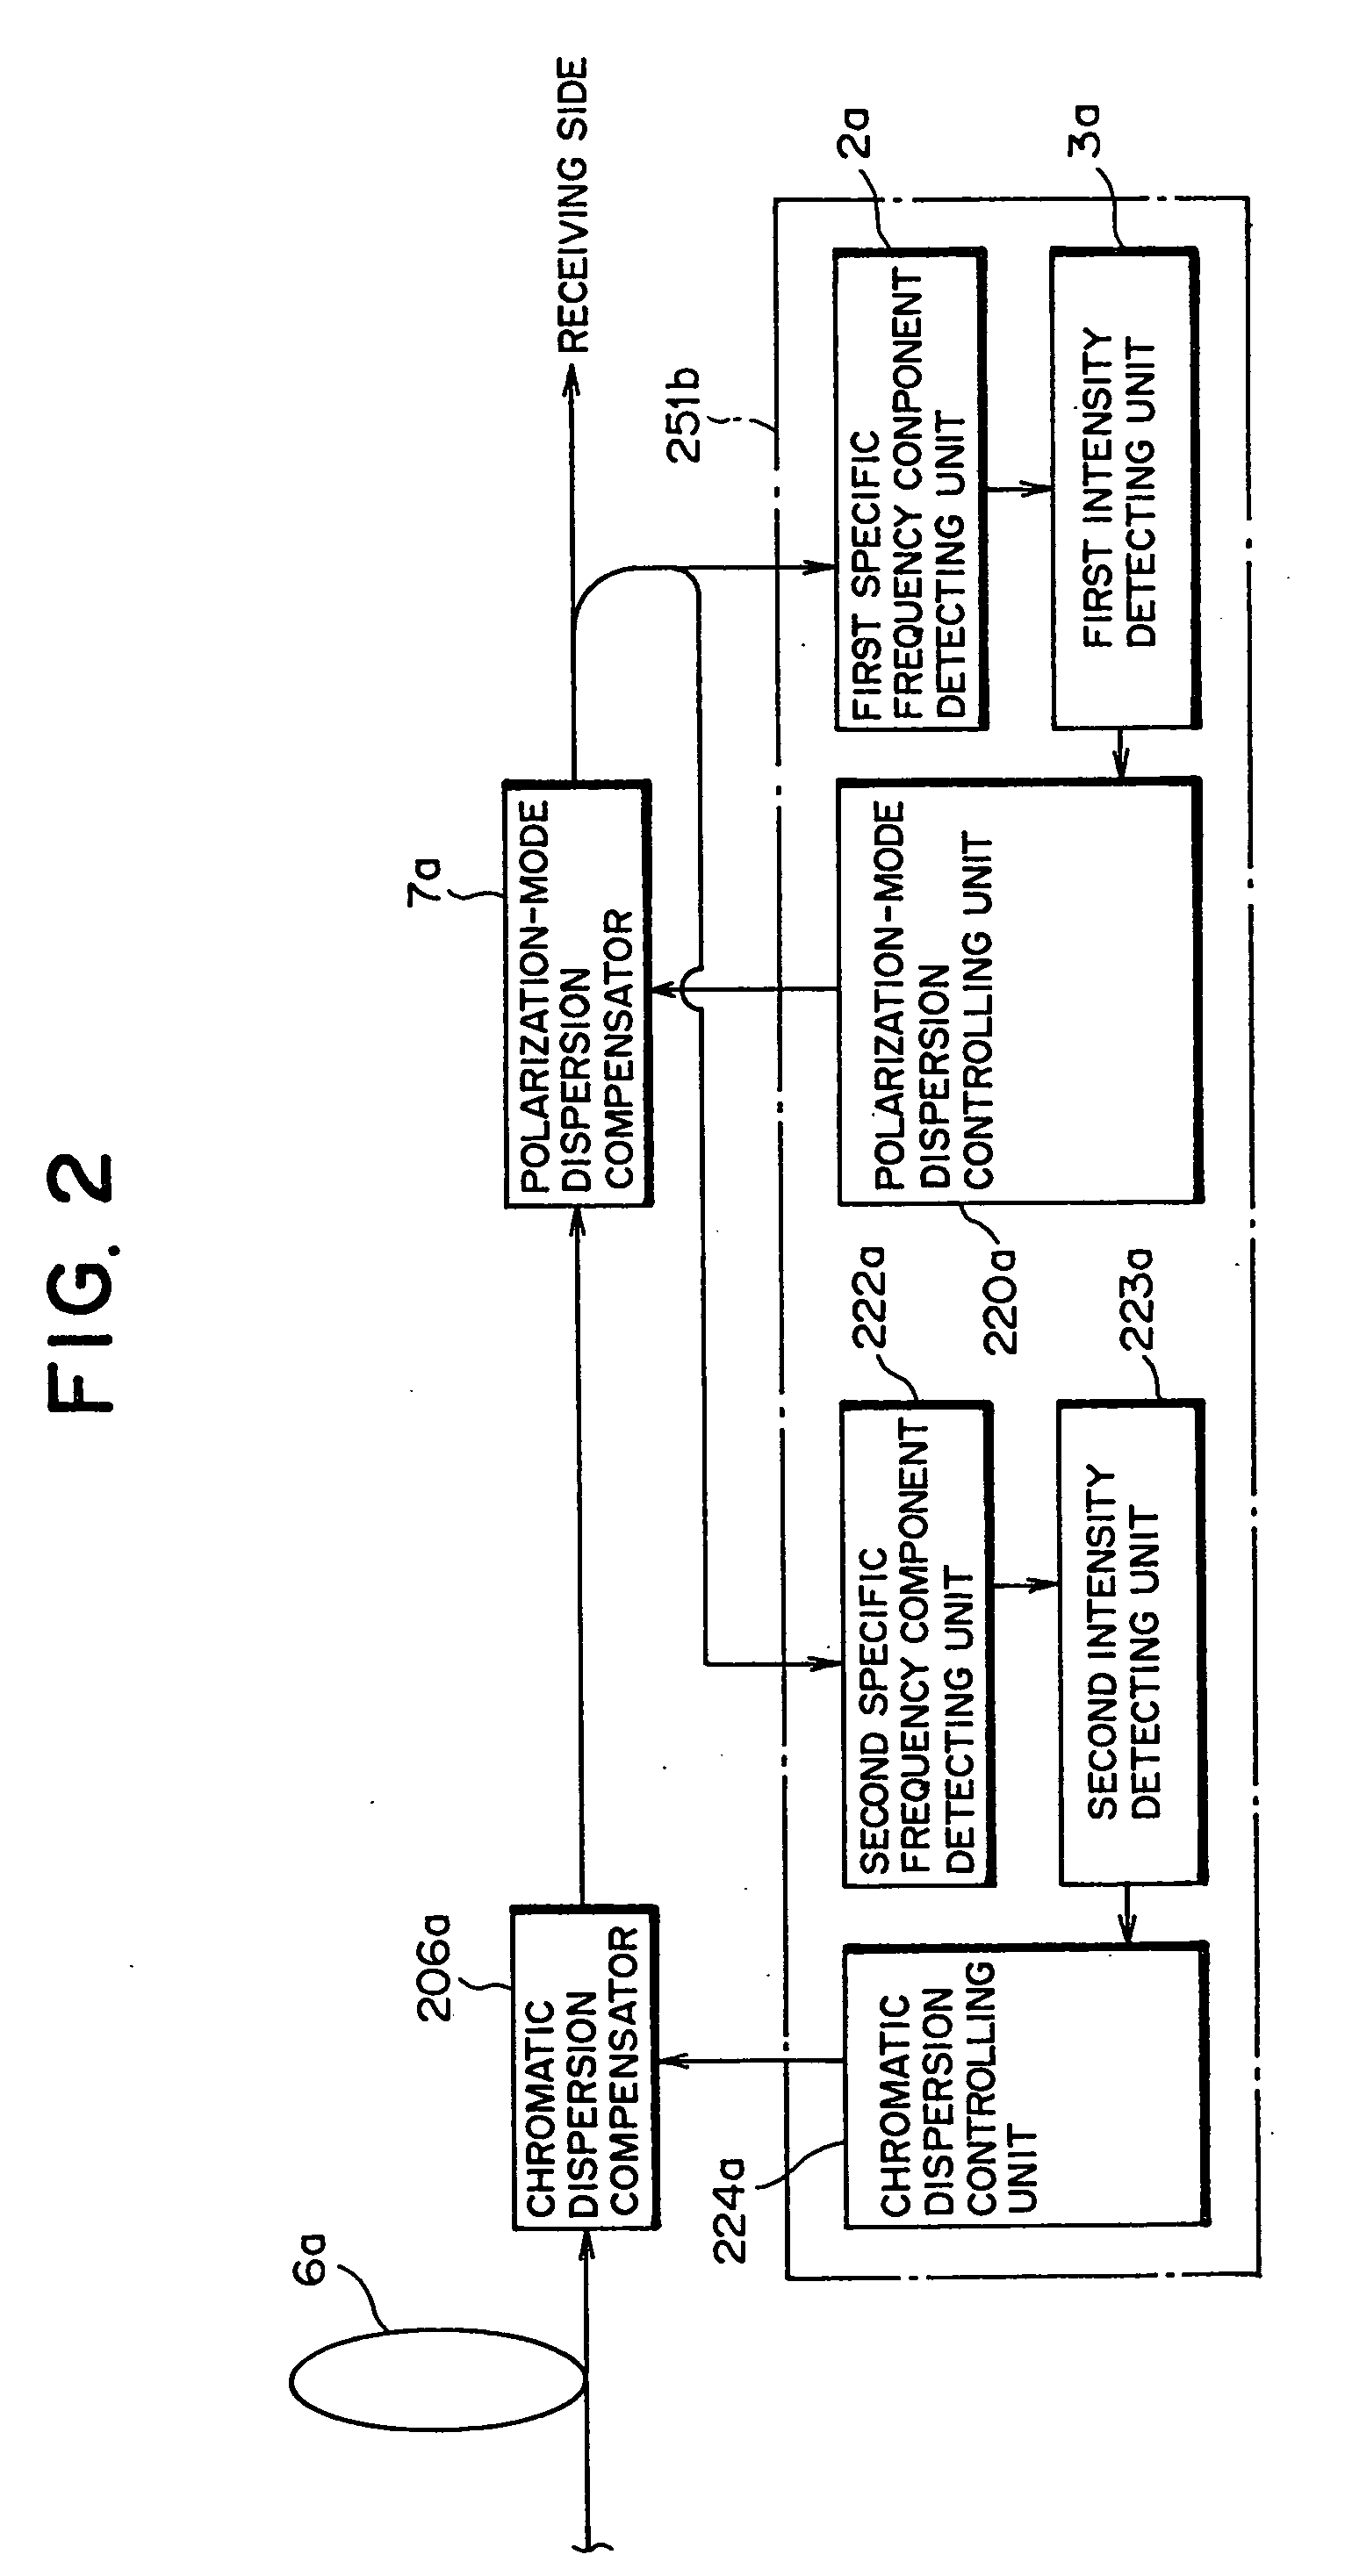 Polarization-mode dispersion detecting method, and a dispersion compensation controlling apparatus and a dispersion compensation controlling method